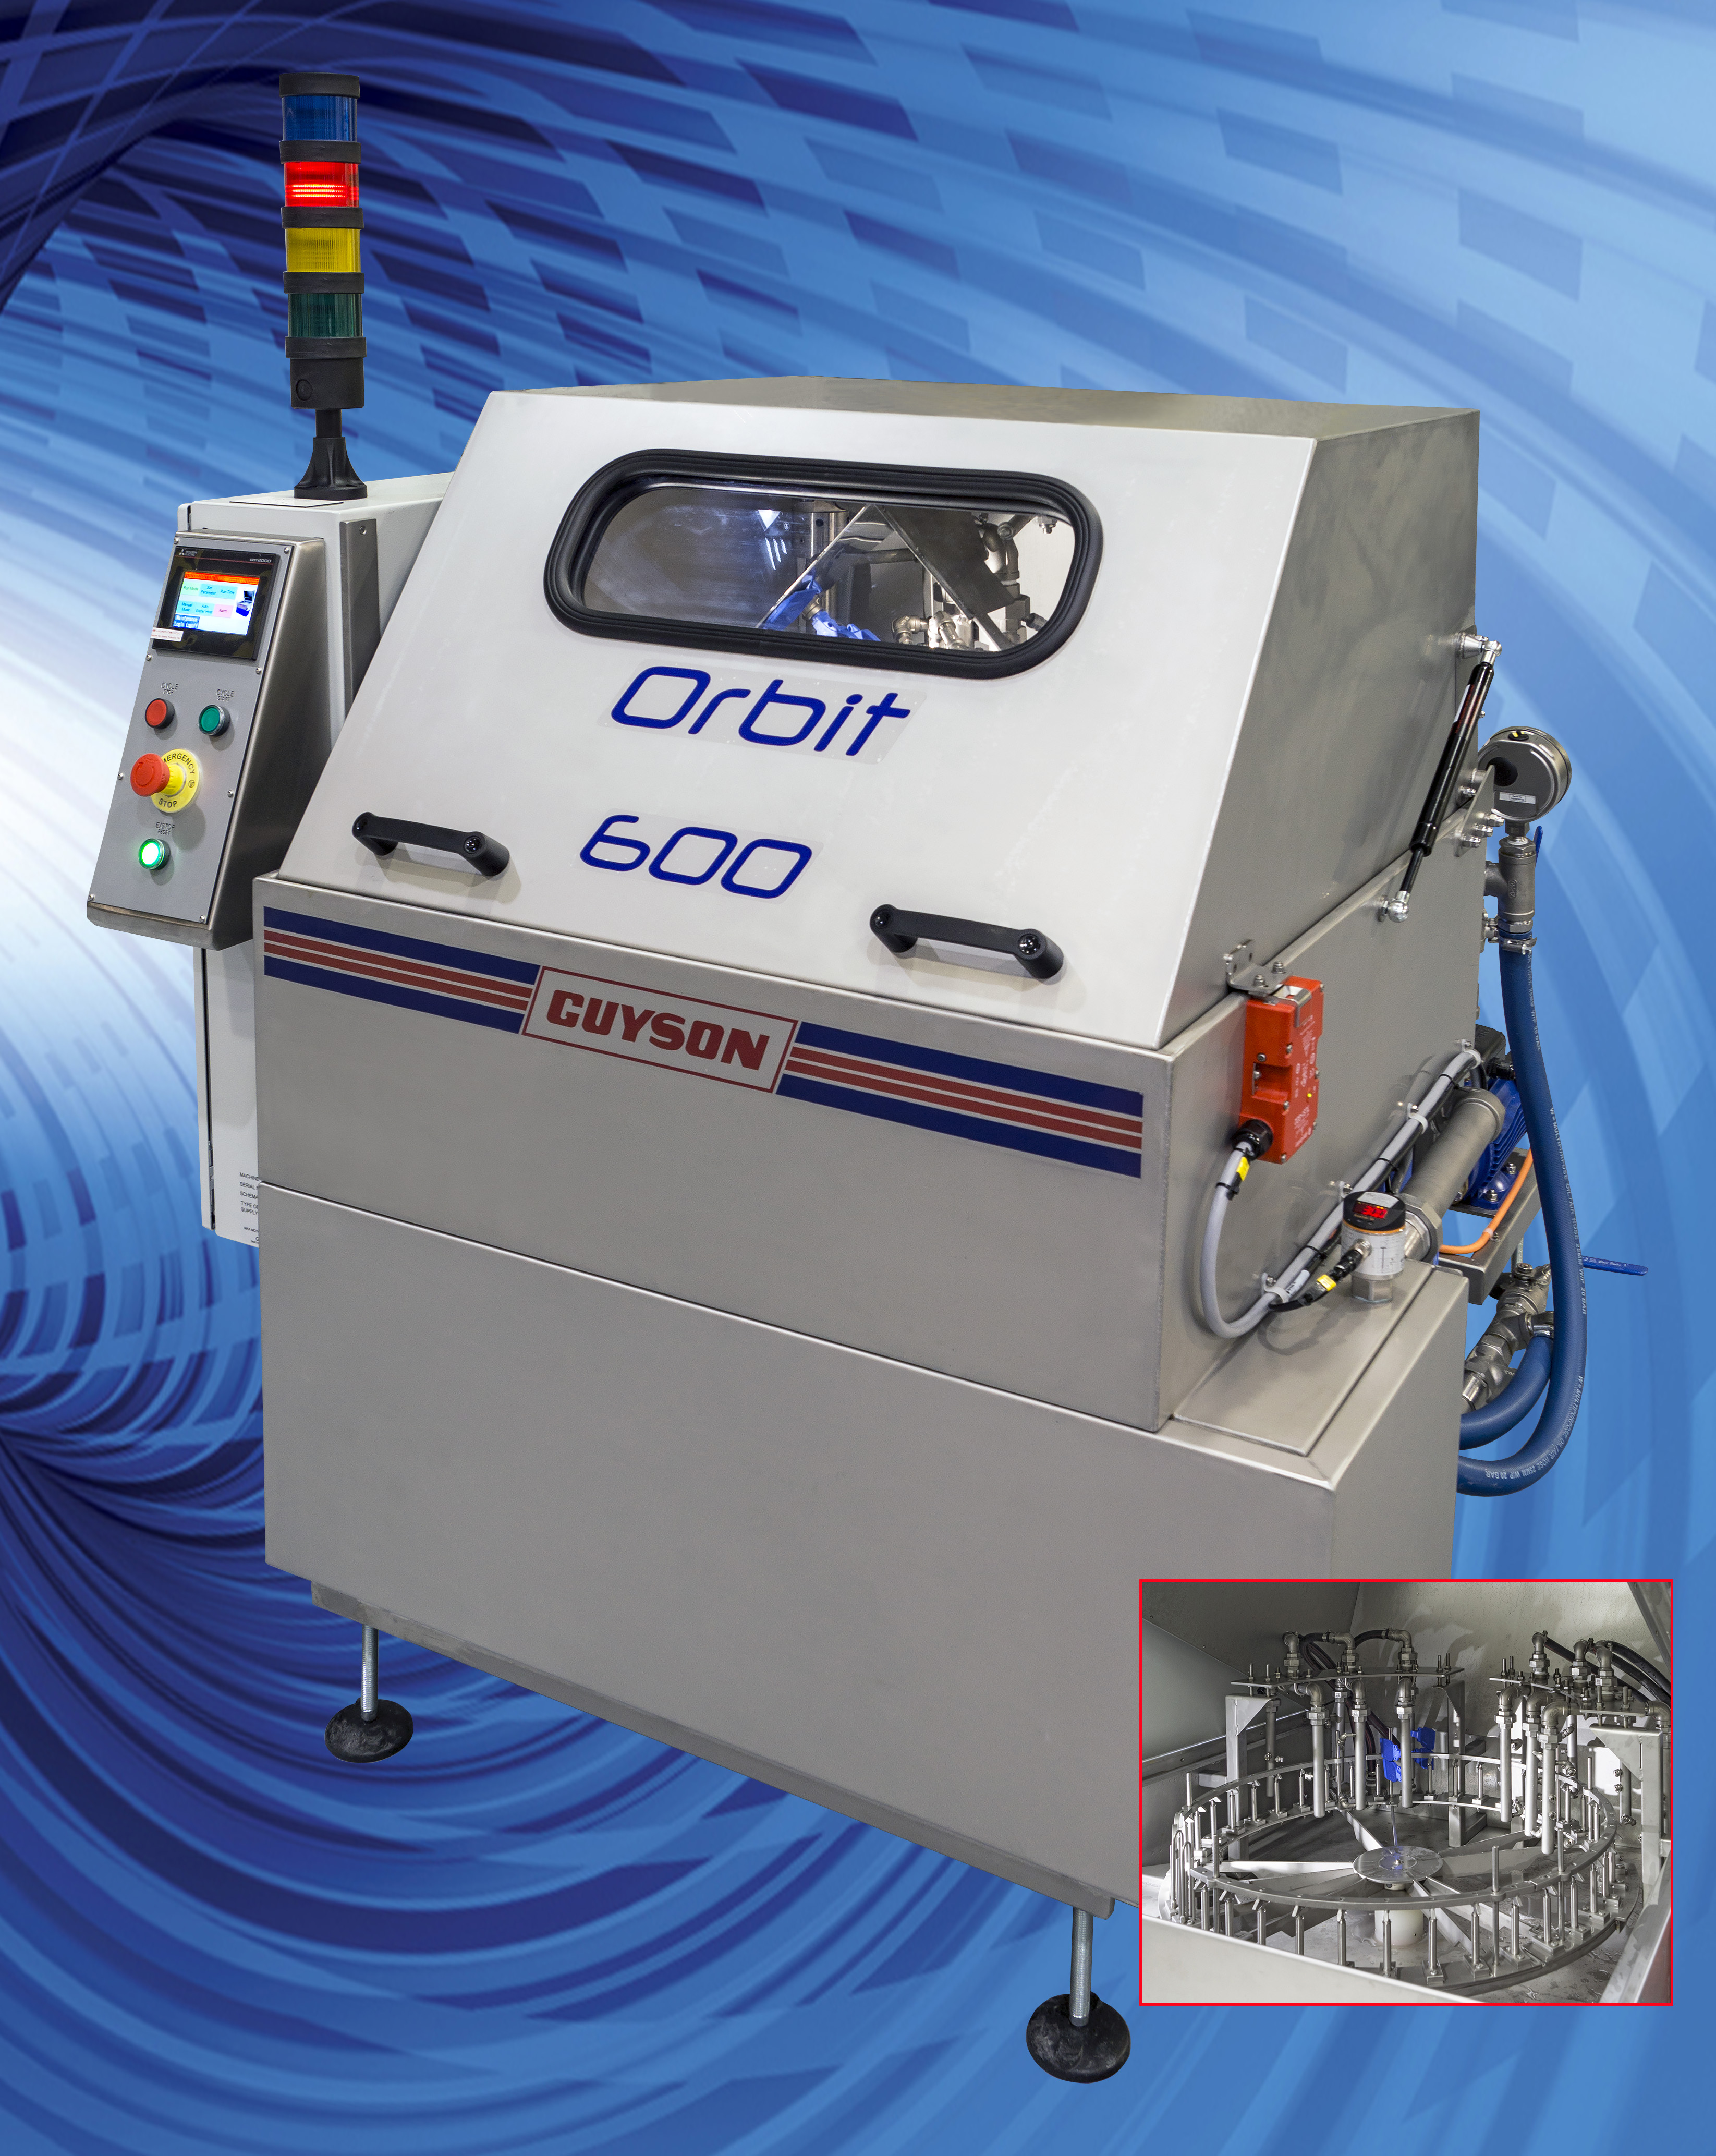 The Orbit 600 Special Powder Flush system for removal of residual additive manufacturing powders from trabecular structures. Photo via Guyson International.